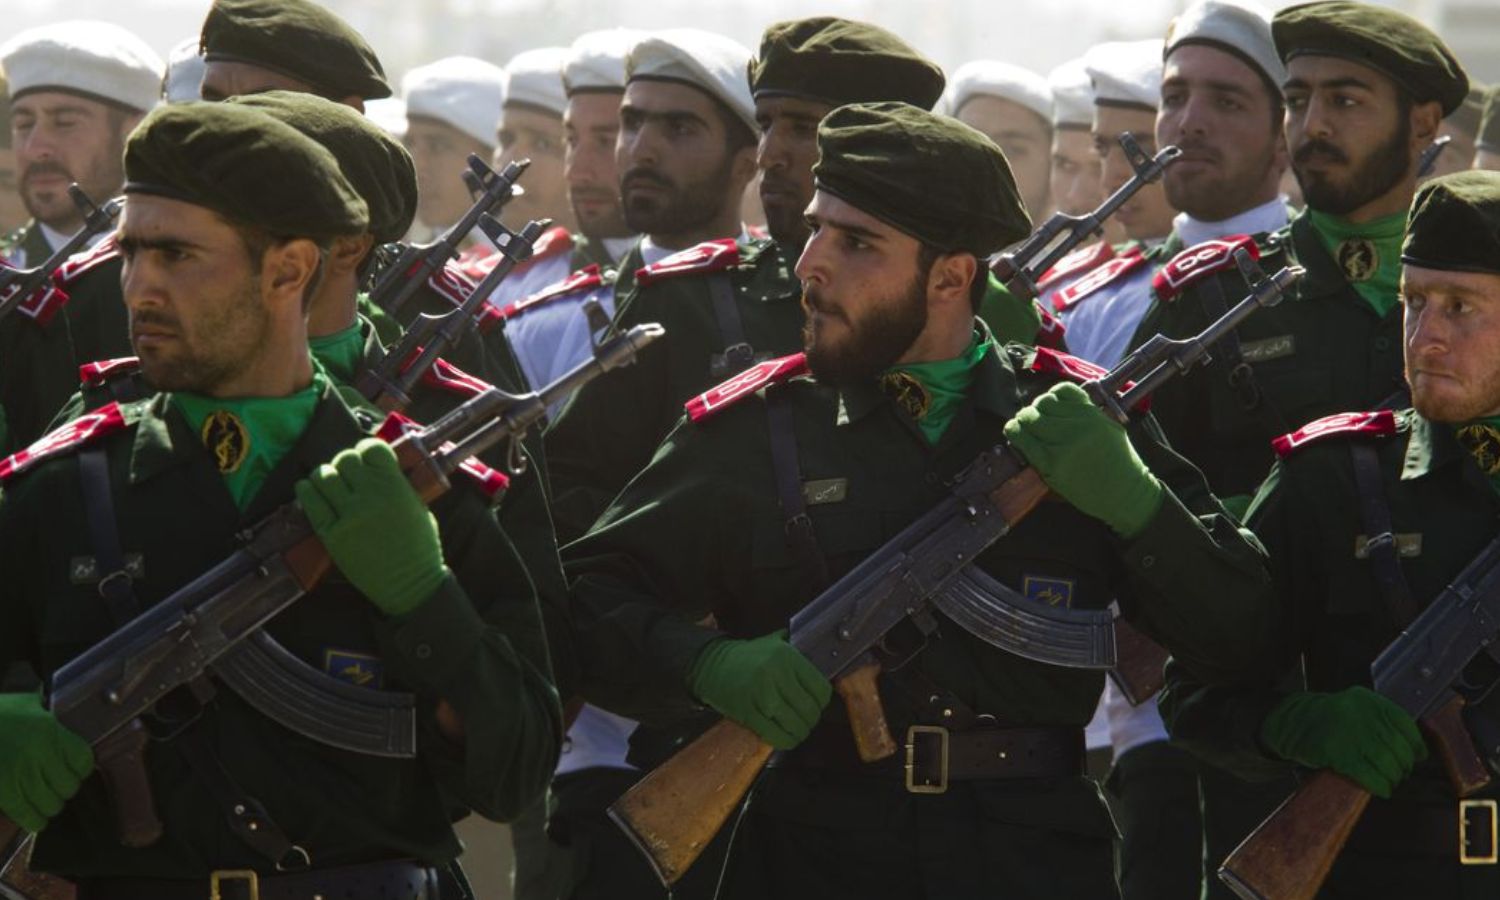 The Iranian Revolutionary Guards during the commemoration of the Iran-Iraq War (1980-1988) in Tehran - 22 September 2010 (Reuters)